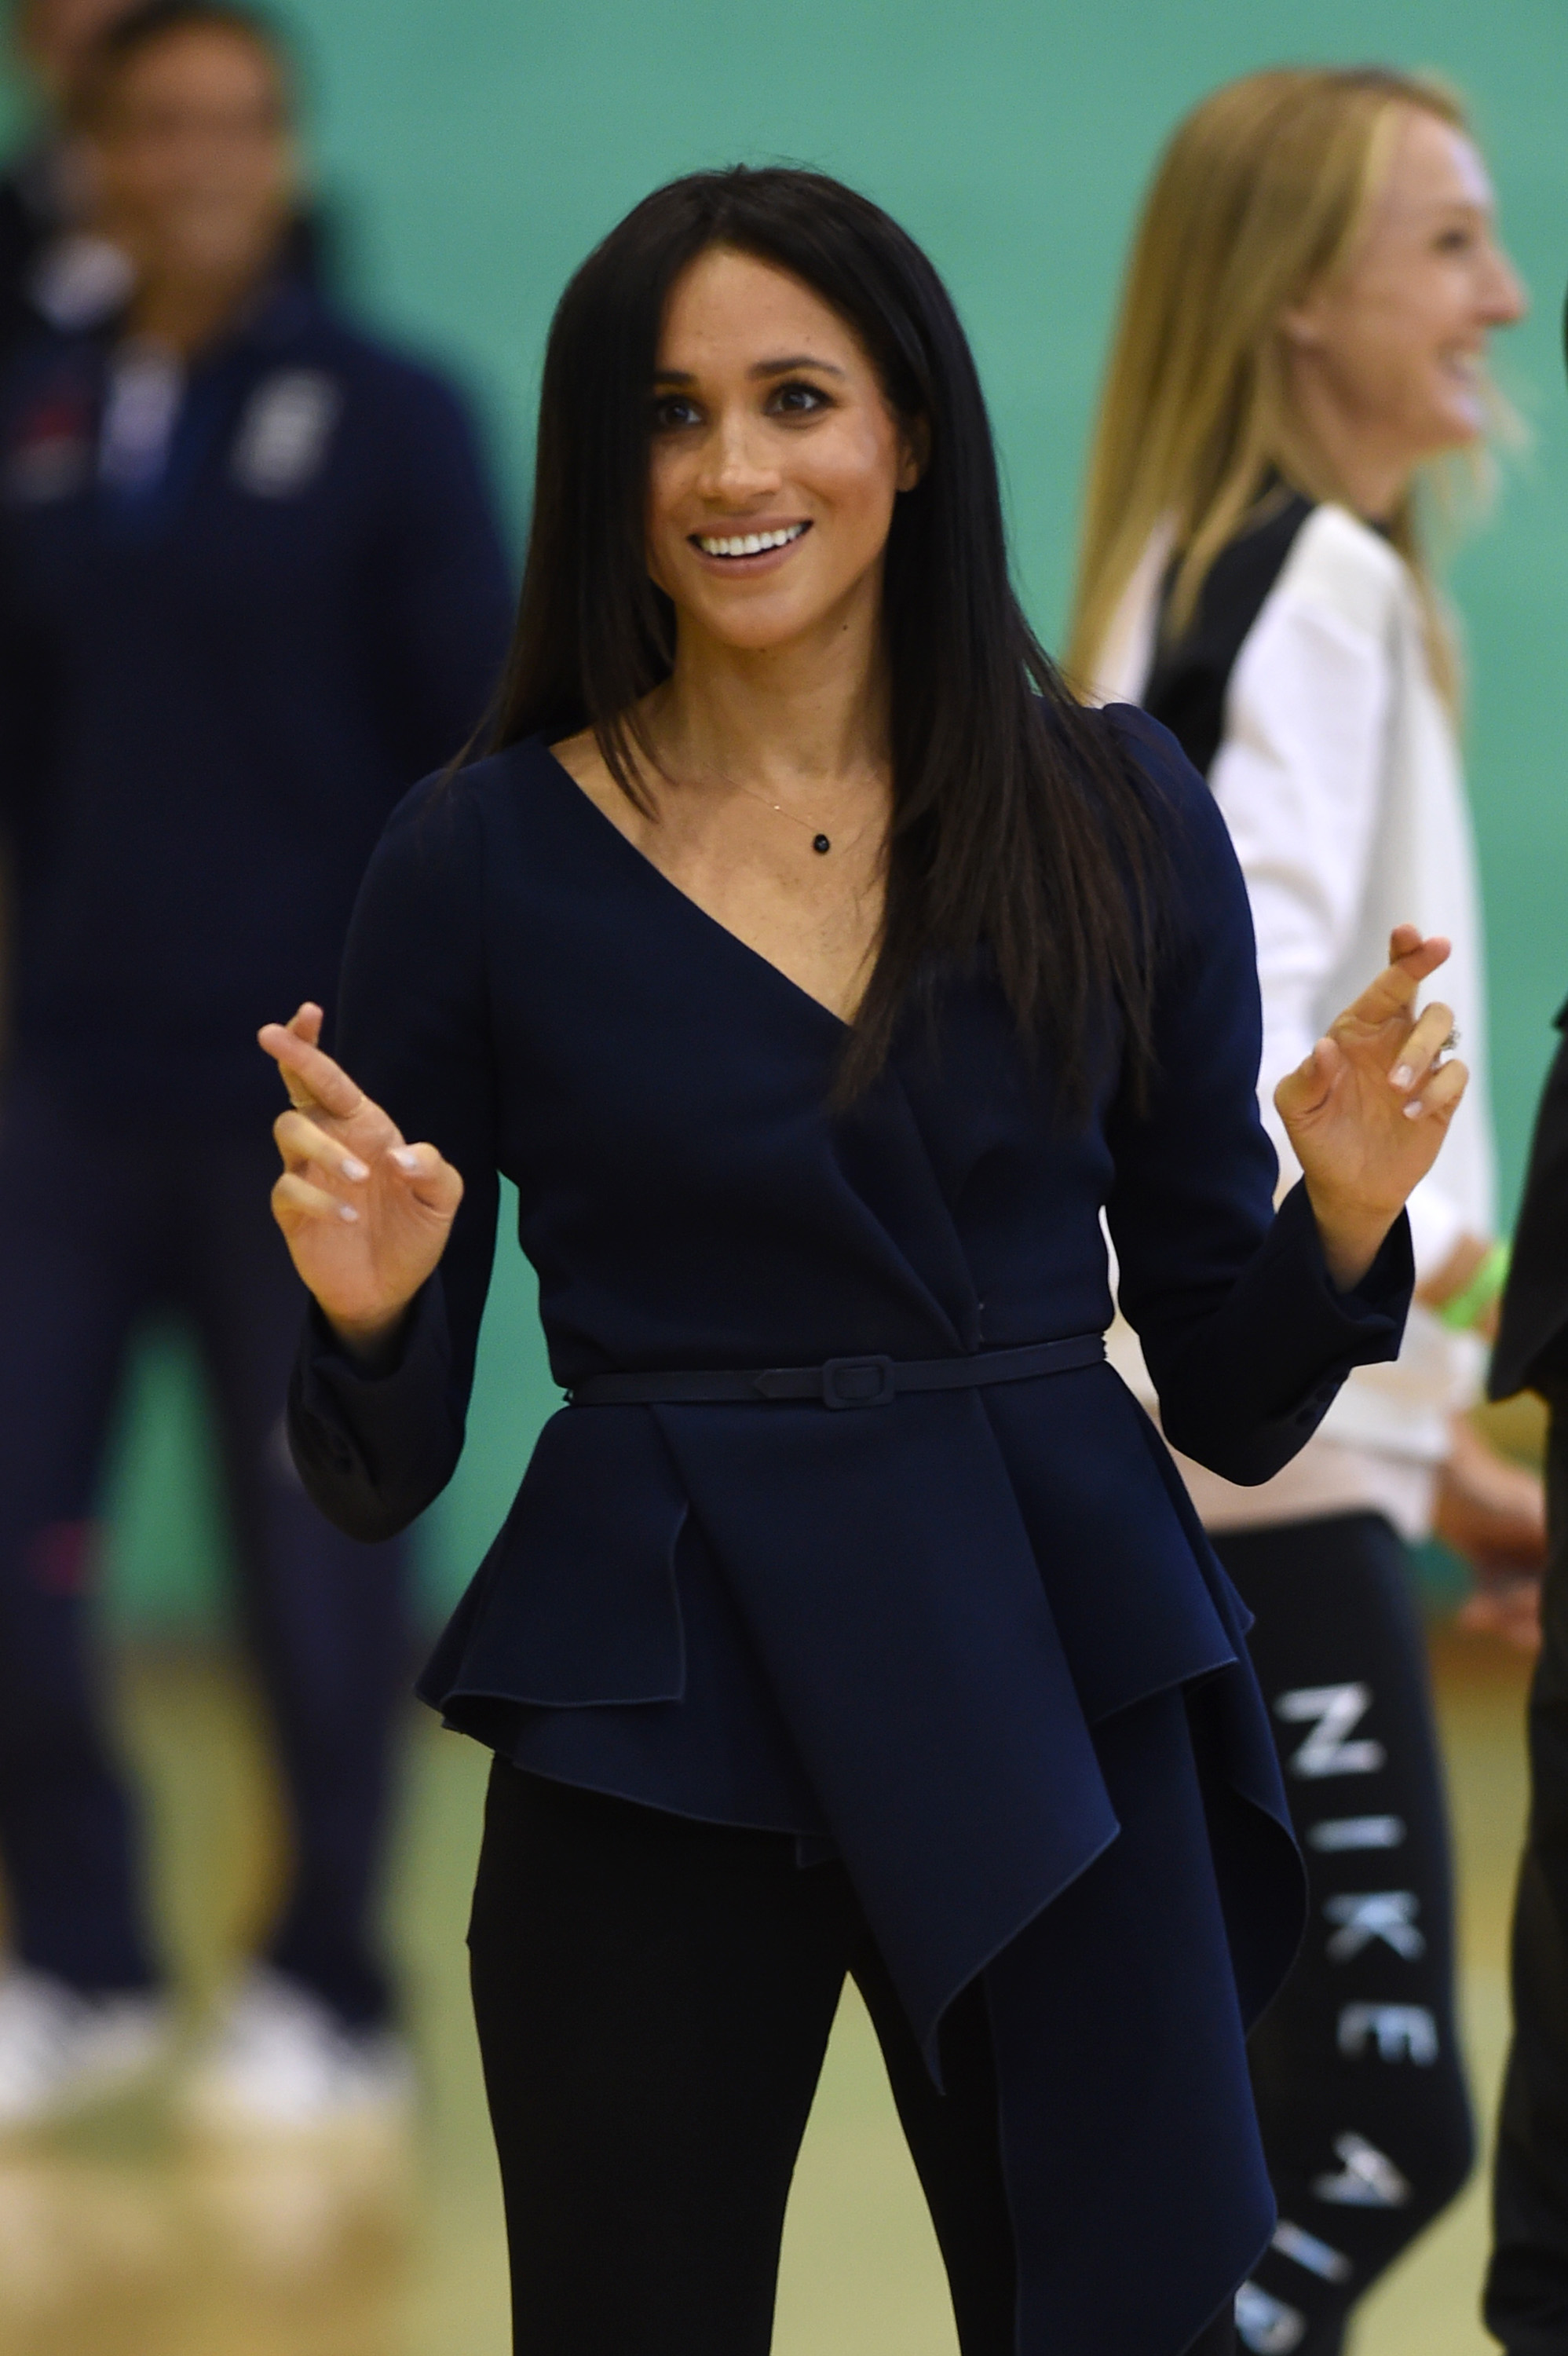 LOUGHBOROUGH, ENGLAND - SEPTEMBER 24: EDITORS NOTE: Retransmission of #1039320452 with alternate crop.) Meghan, Duchess of Sussex attends the Coach Core Awards held at Loughborough University on September 24, 2018 in Loughborough, England. (Photo by Eddie Mulholland - WPA Pool/Getty Images)